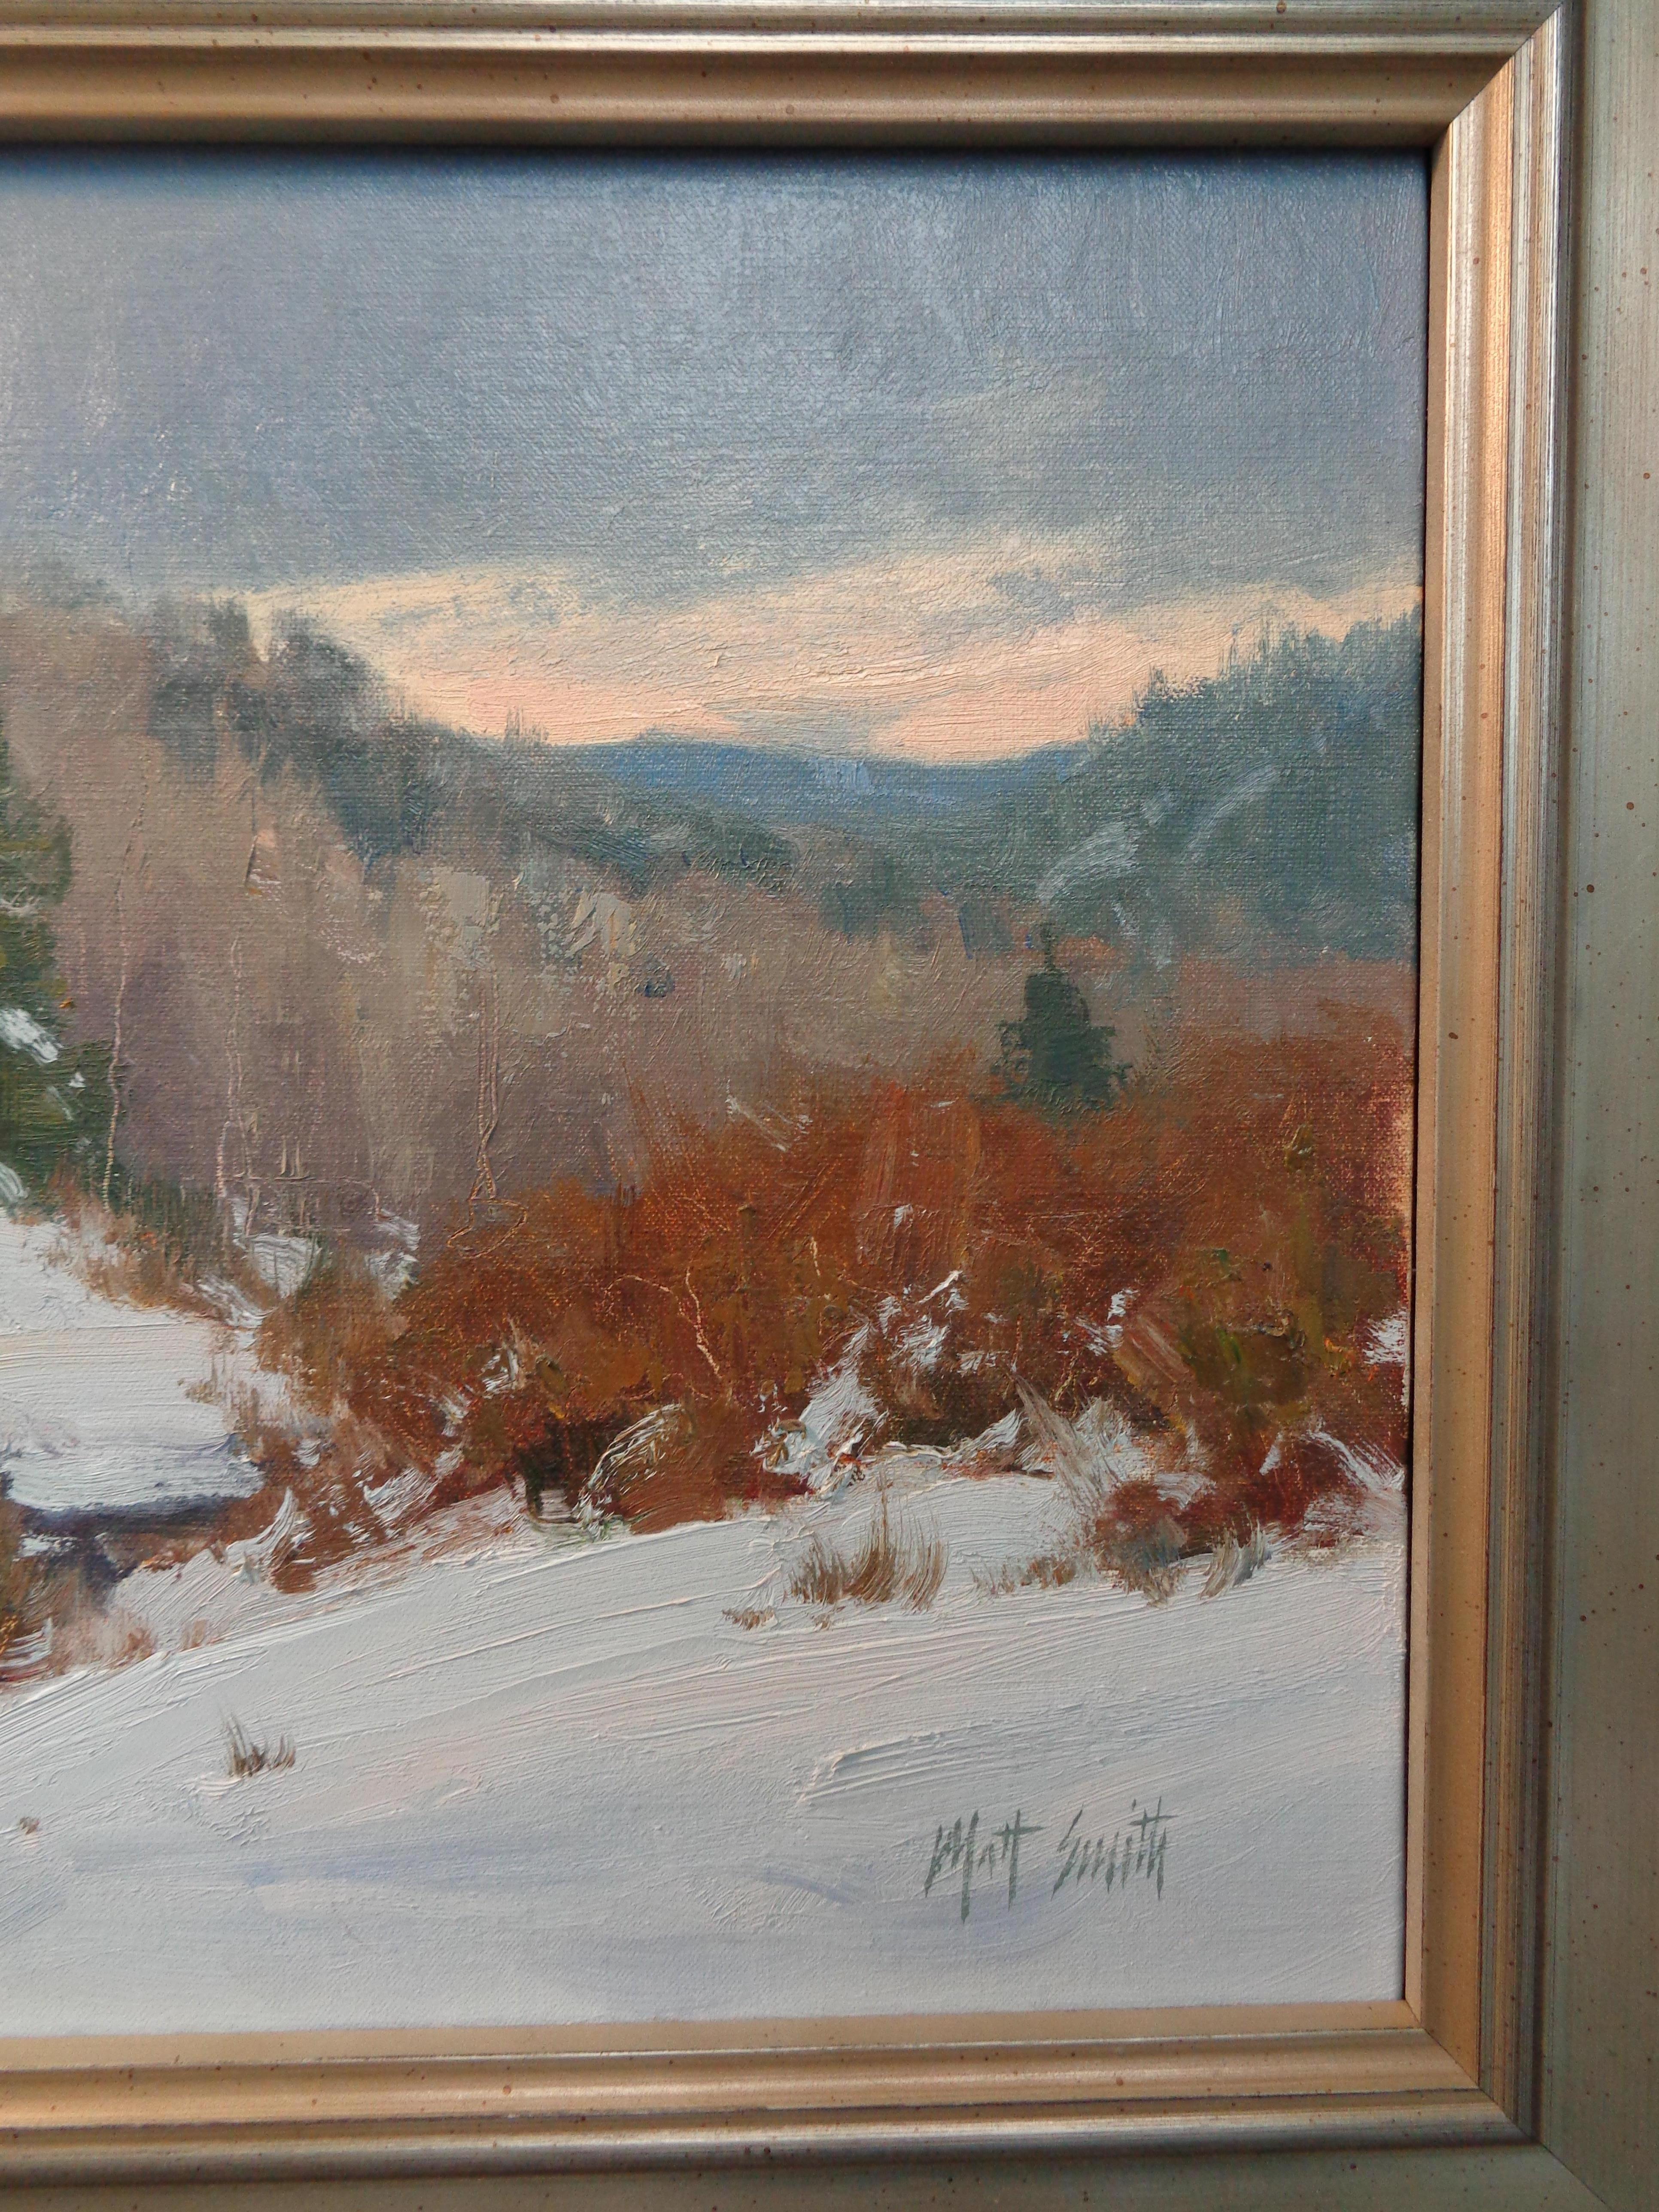 Colorado Winter Morning
oil/canvas laid down to board
image 12 x 15.75 unframed
Bio
Matt Smith was born in Kansas City, Missouri in 1960.  At an early age he moved to Arizona where he developed his life long connection to the Sonoran Desert and the